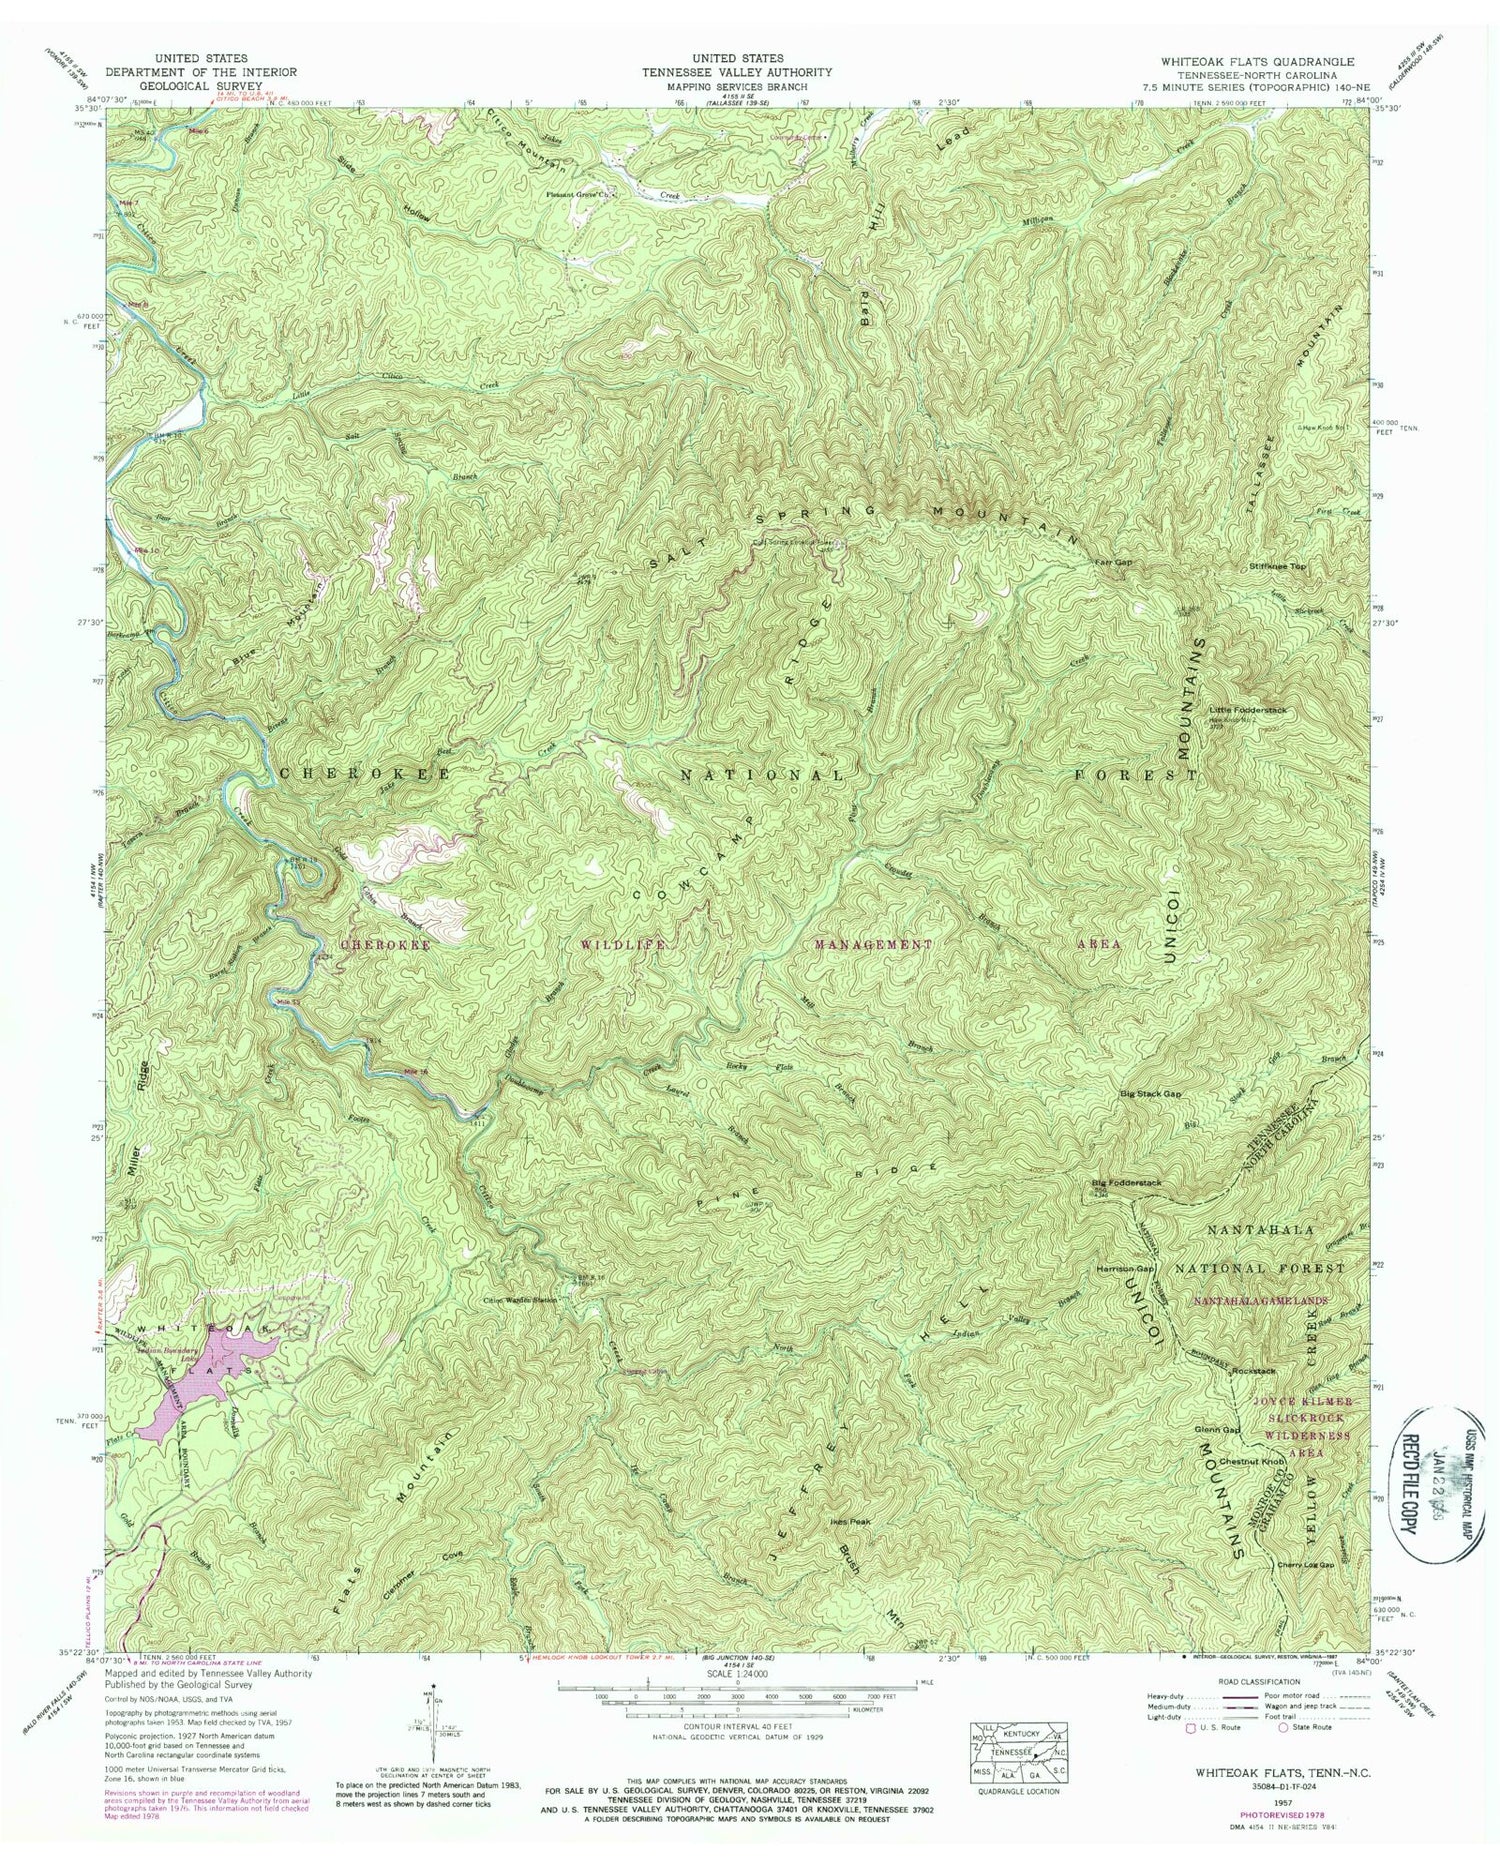 Classic USGS Whiteoak Flats Tennessee 7.5'x7.5' Topo Map Image